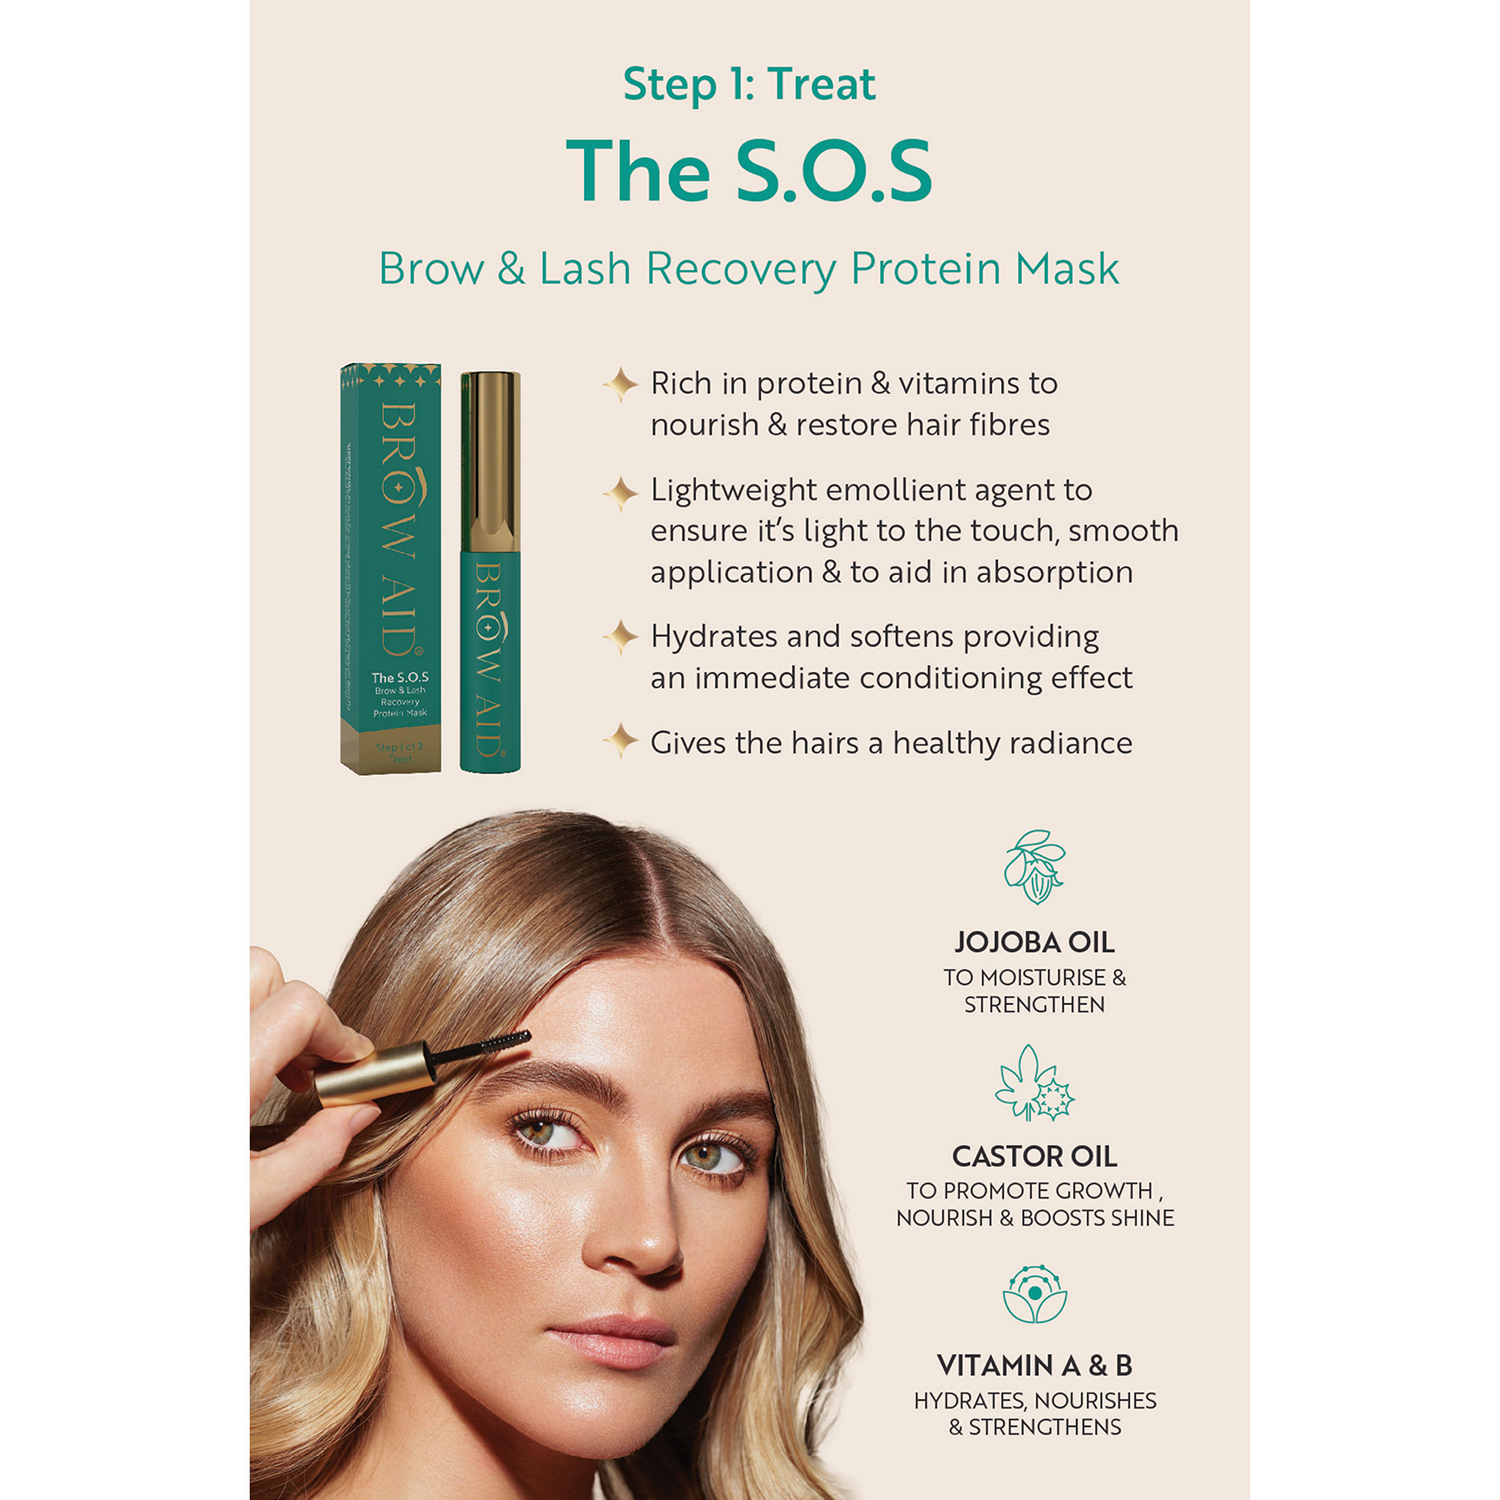 The S.O.S Brow & Lash Recovery Mask